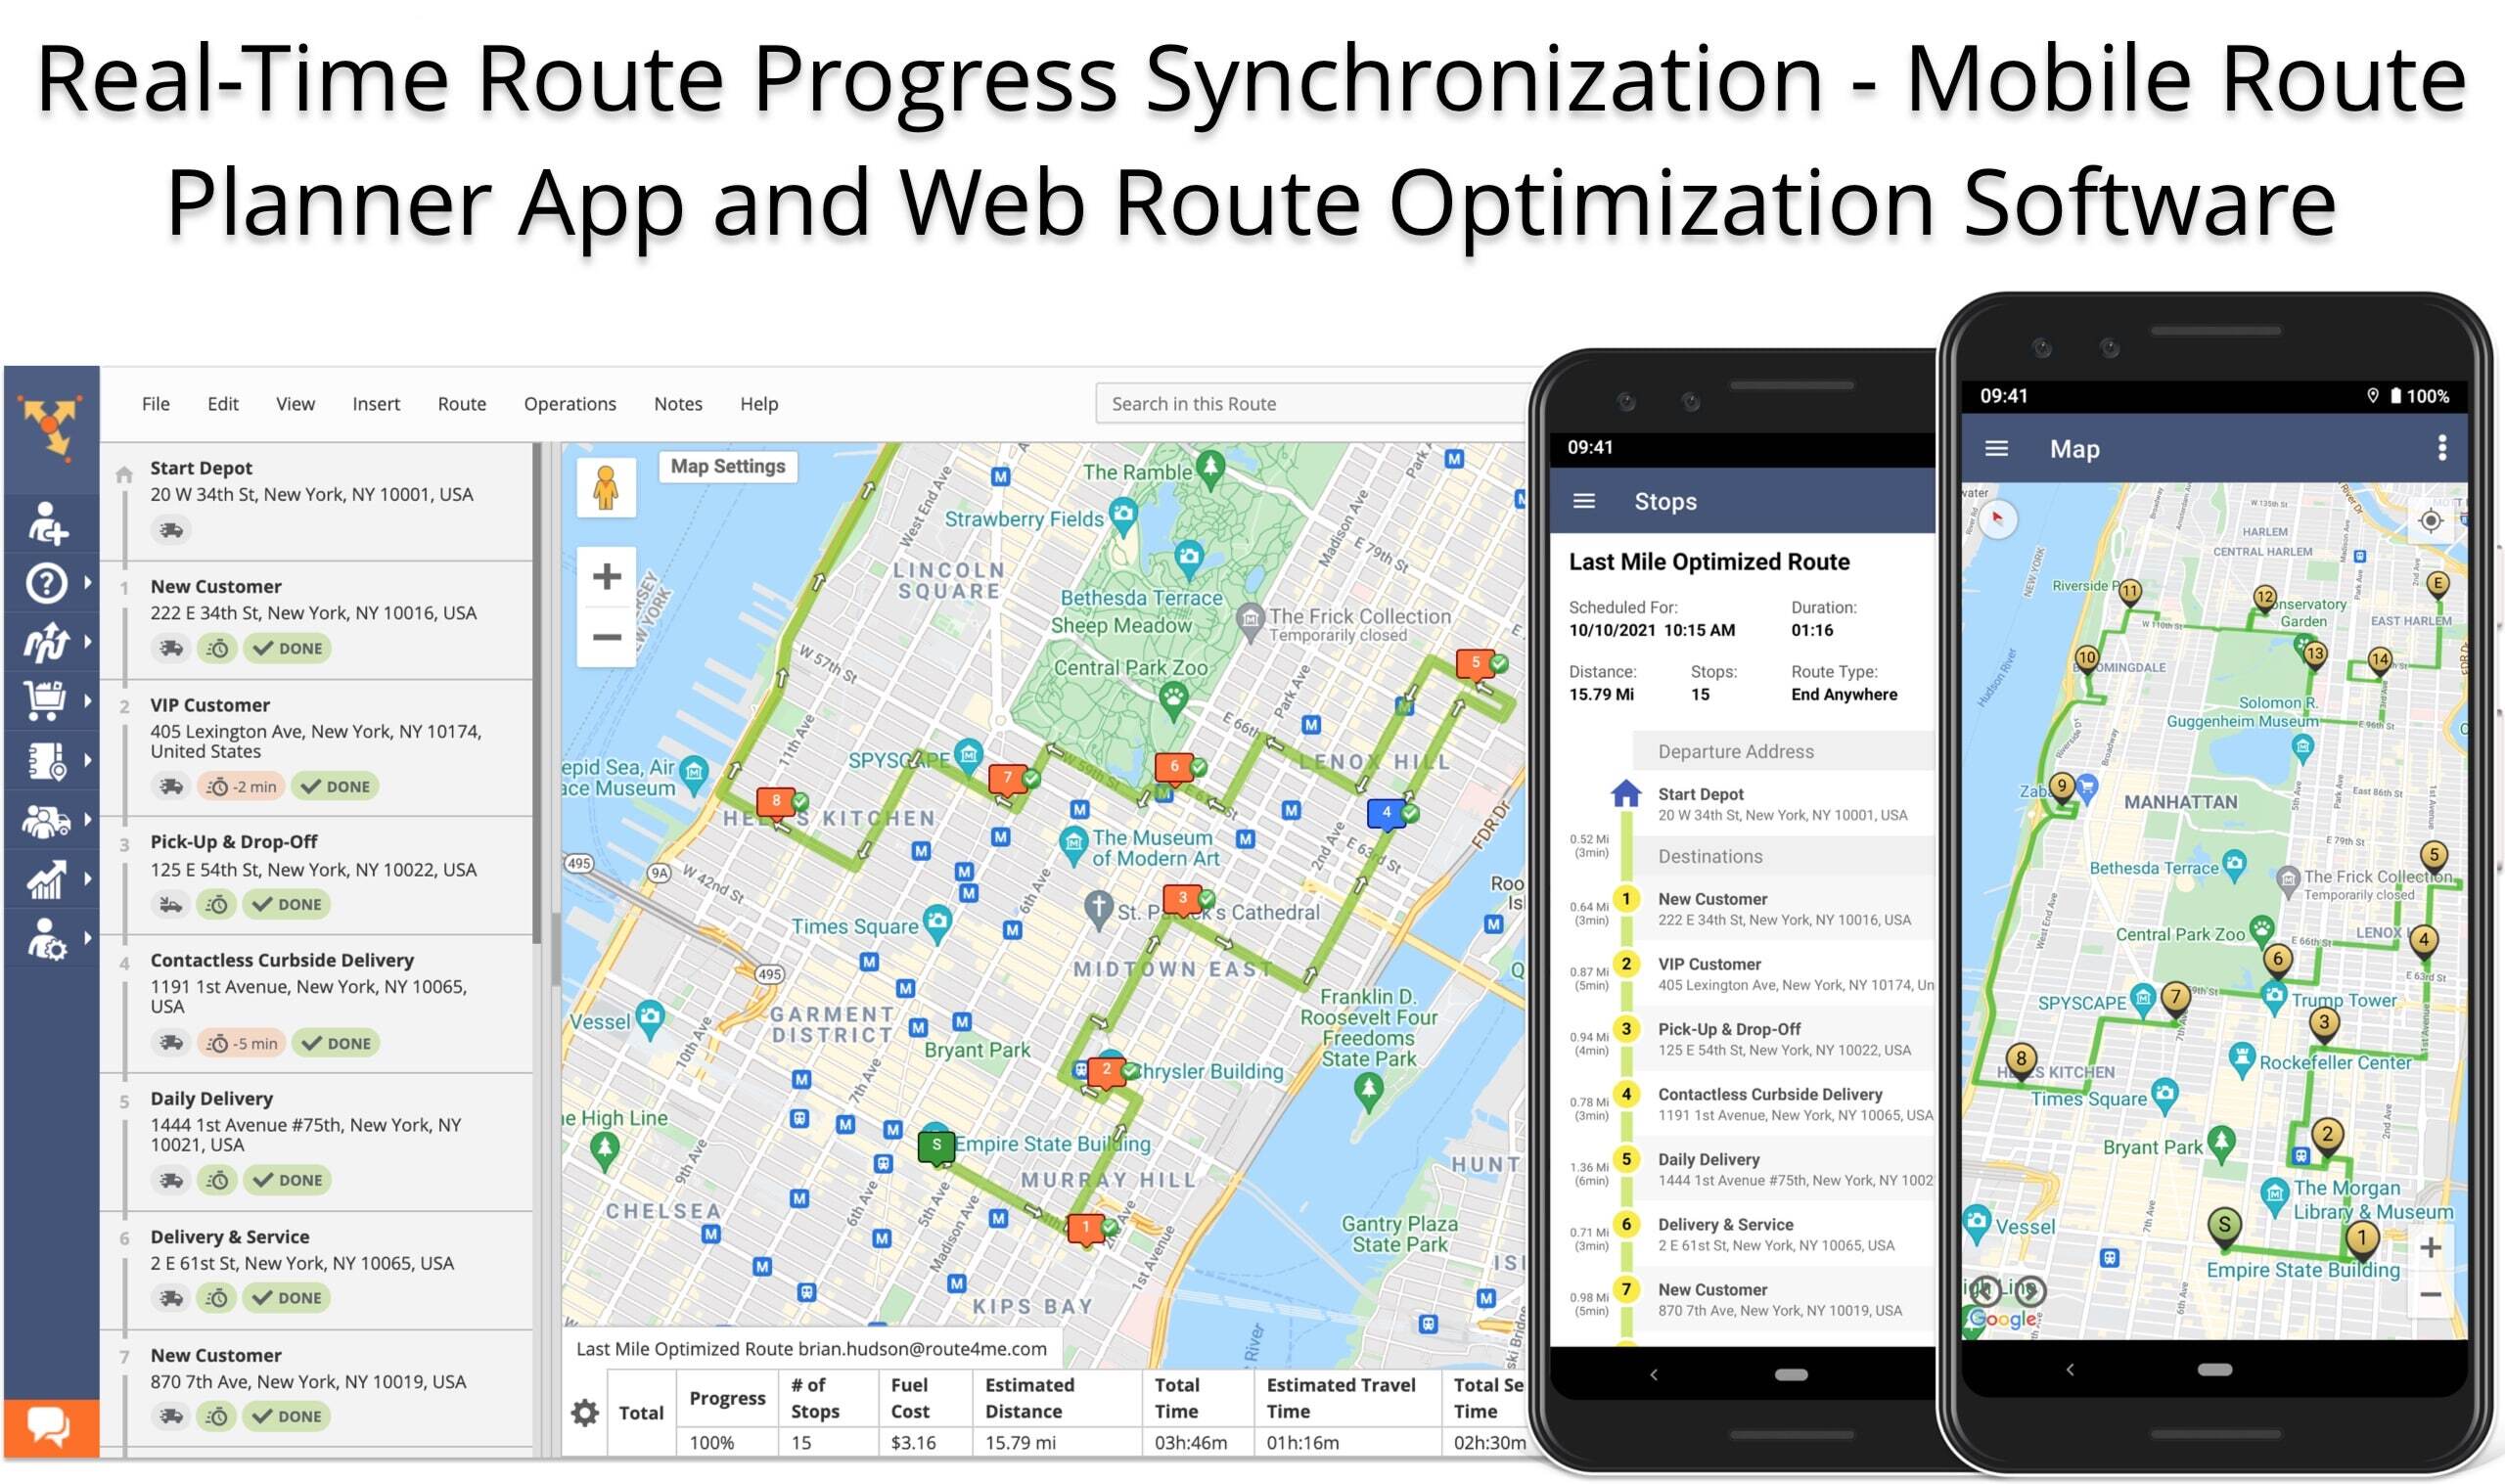 Route Planner app and Web route planning software real-time route progress synchronization.